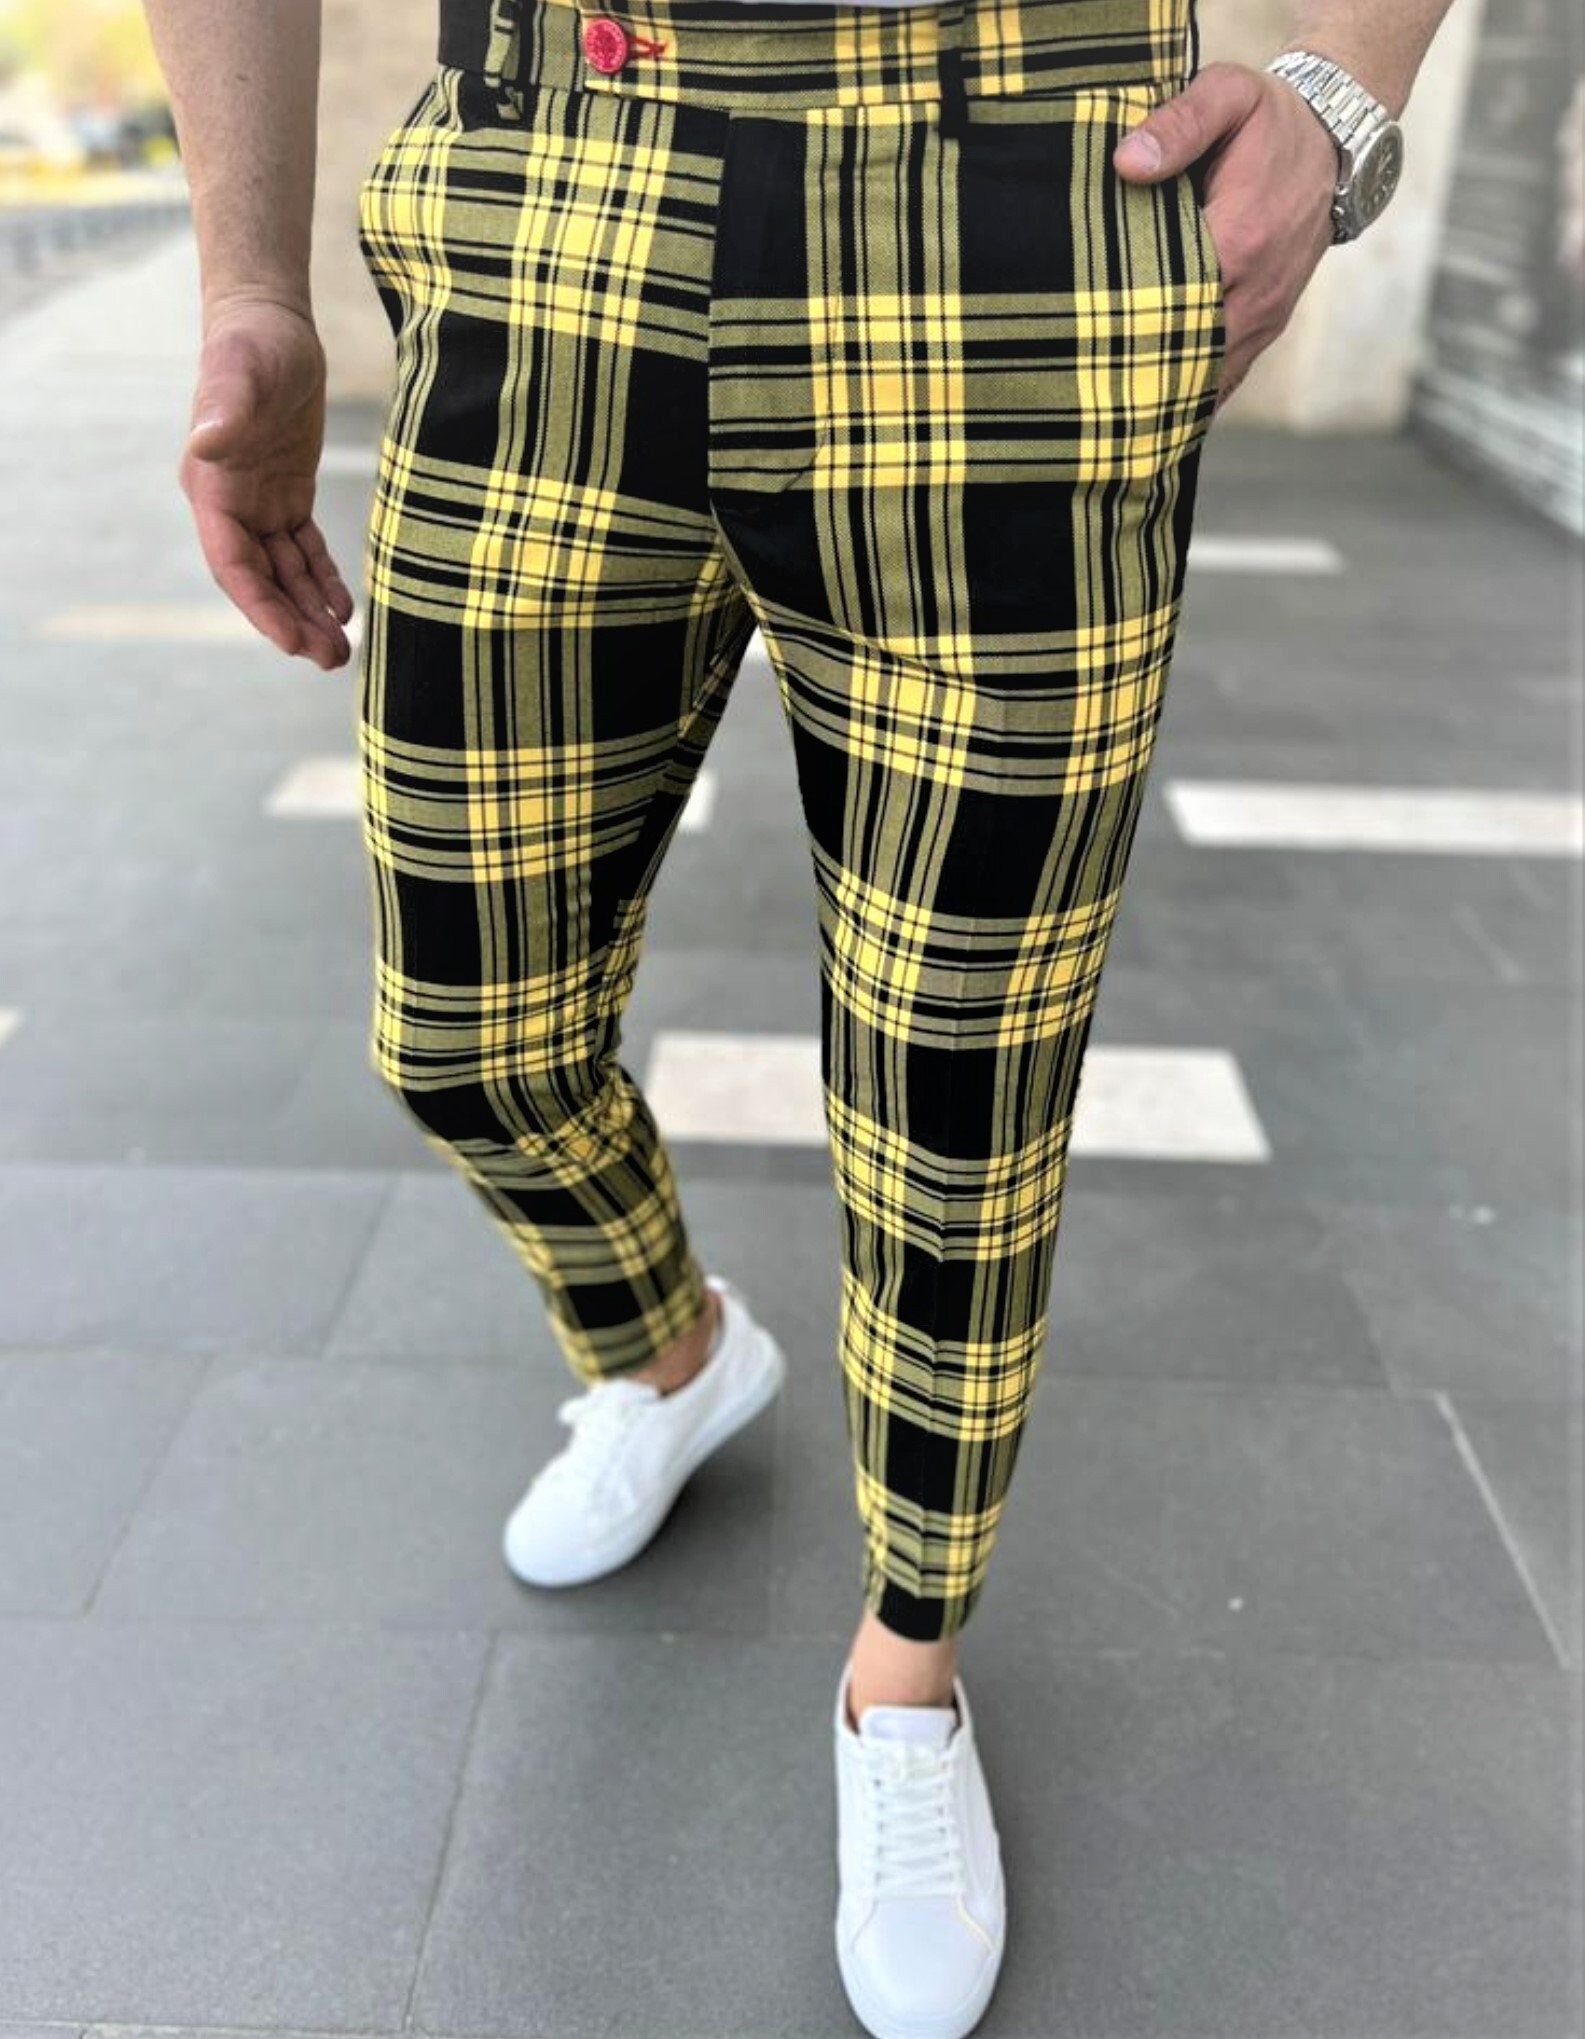 Kat's Love Too True Yellow Plaid Pants - Size S - Rhymes With Orange